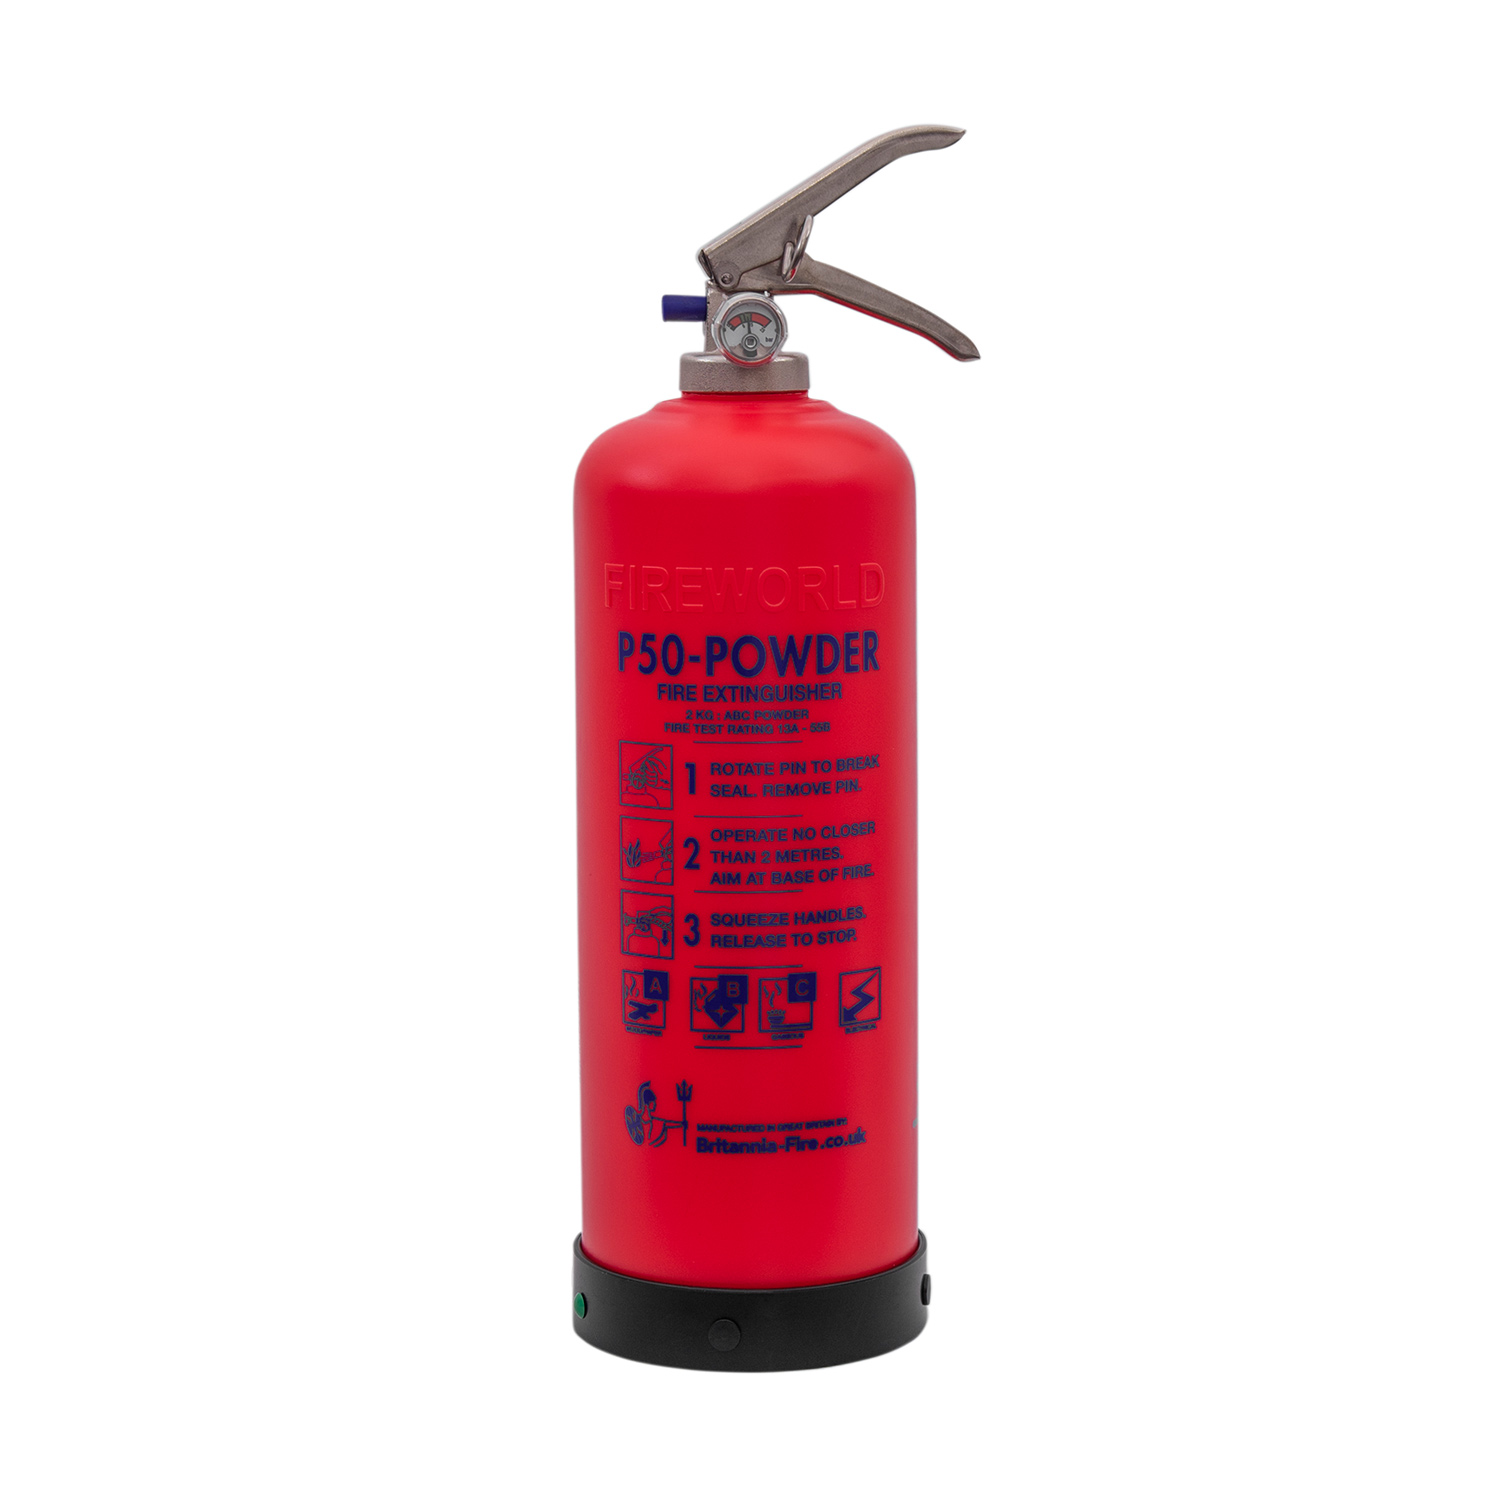 Image of the P50 2kg Powder Fire Extinguisher